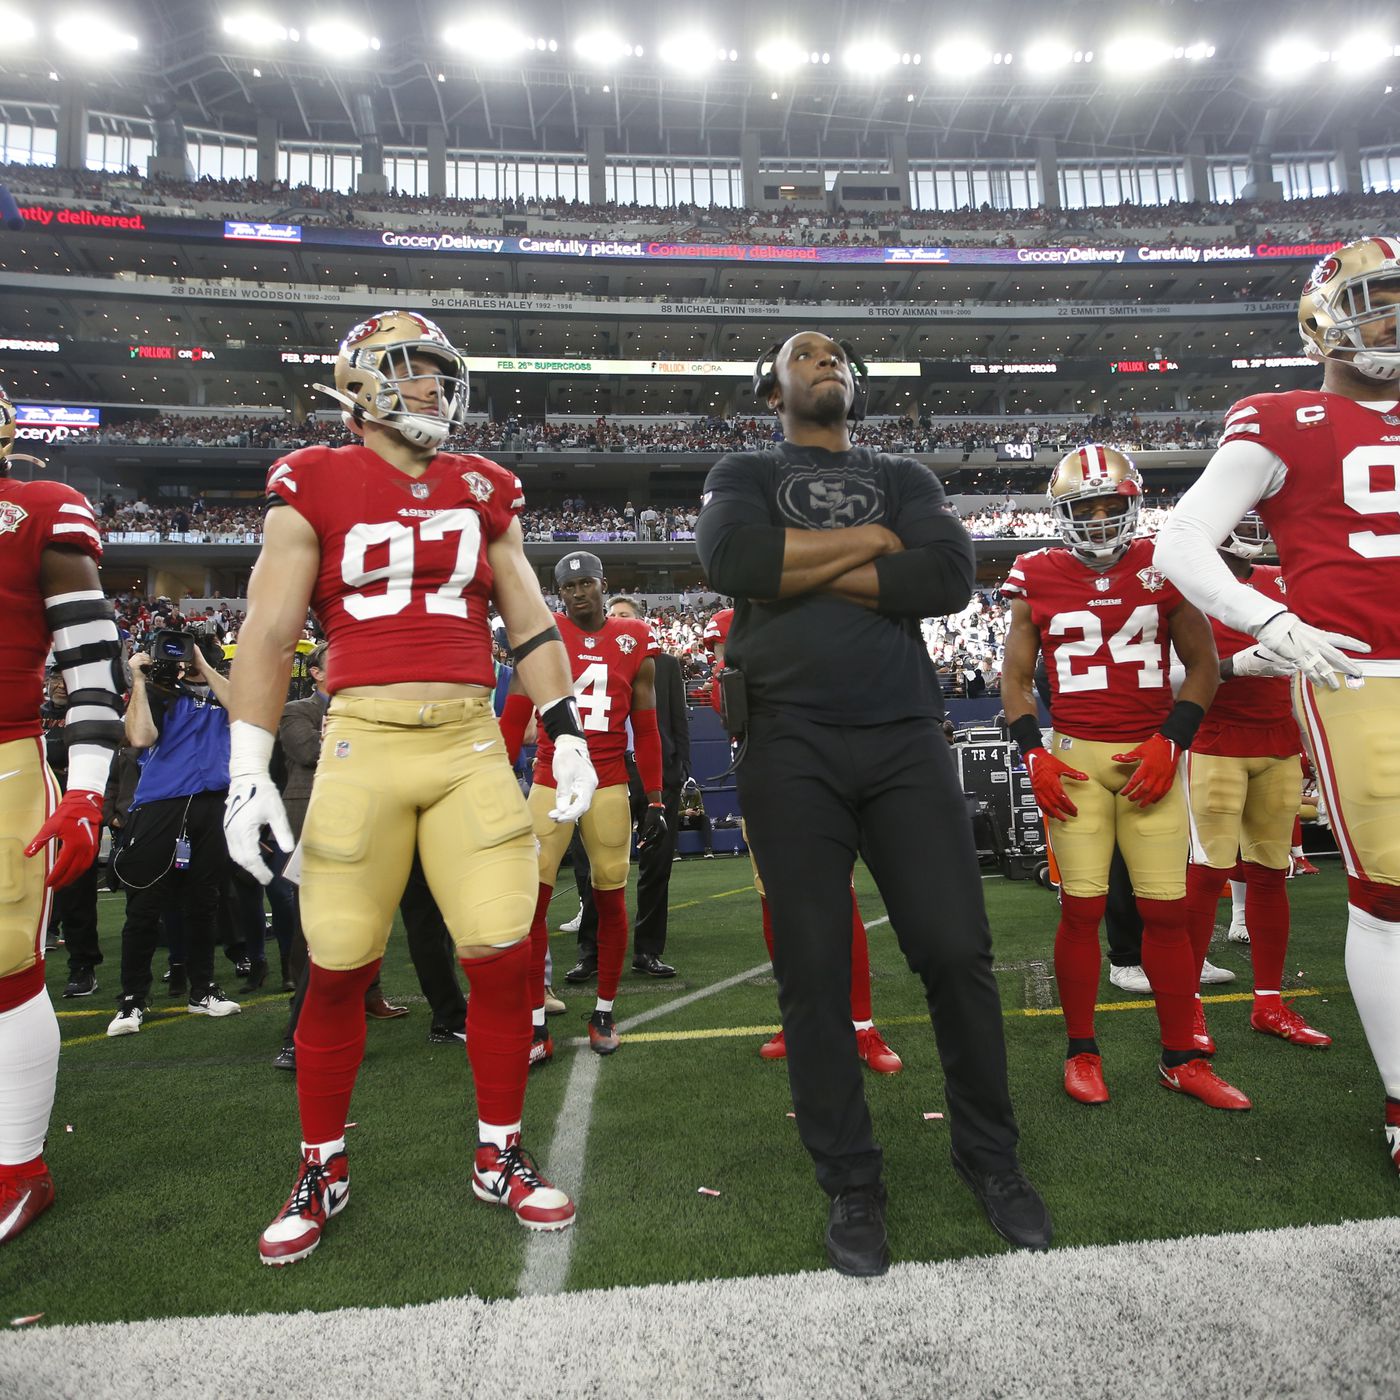 49ers 2022 record prediction: How many games will the Niners win